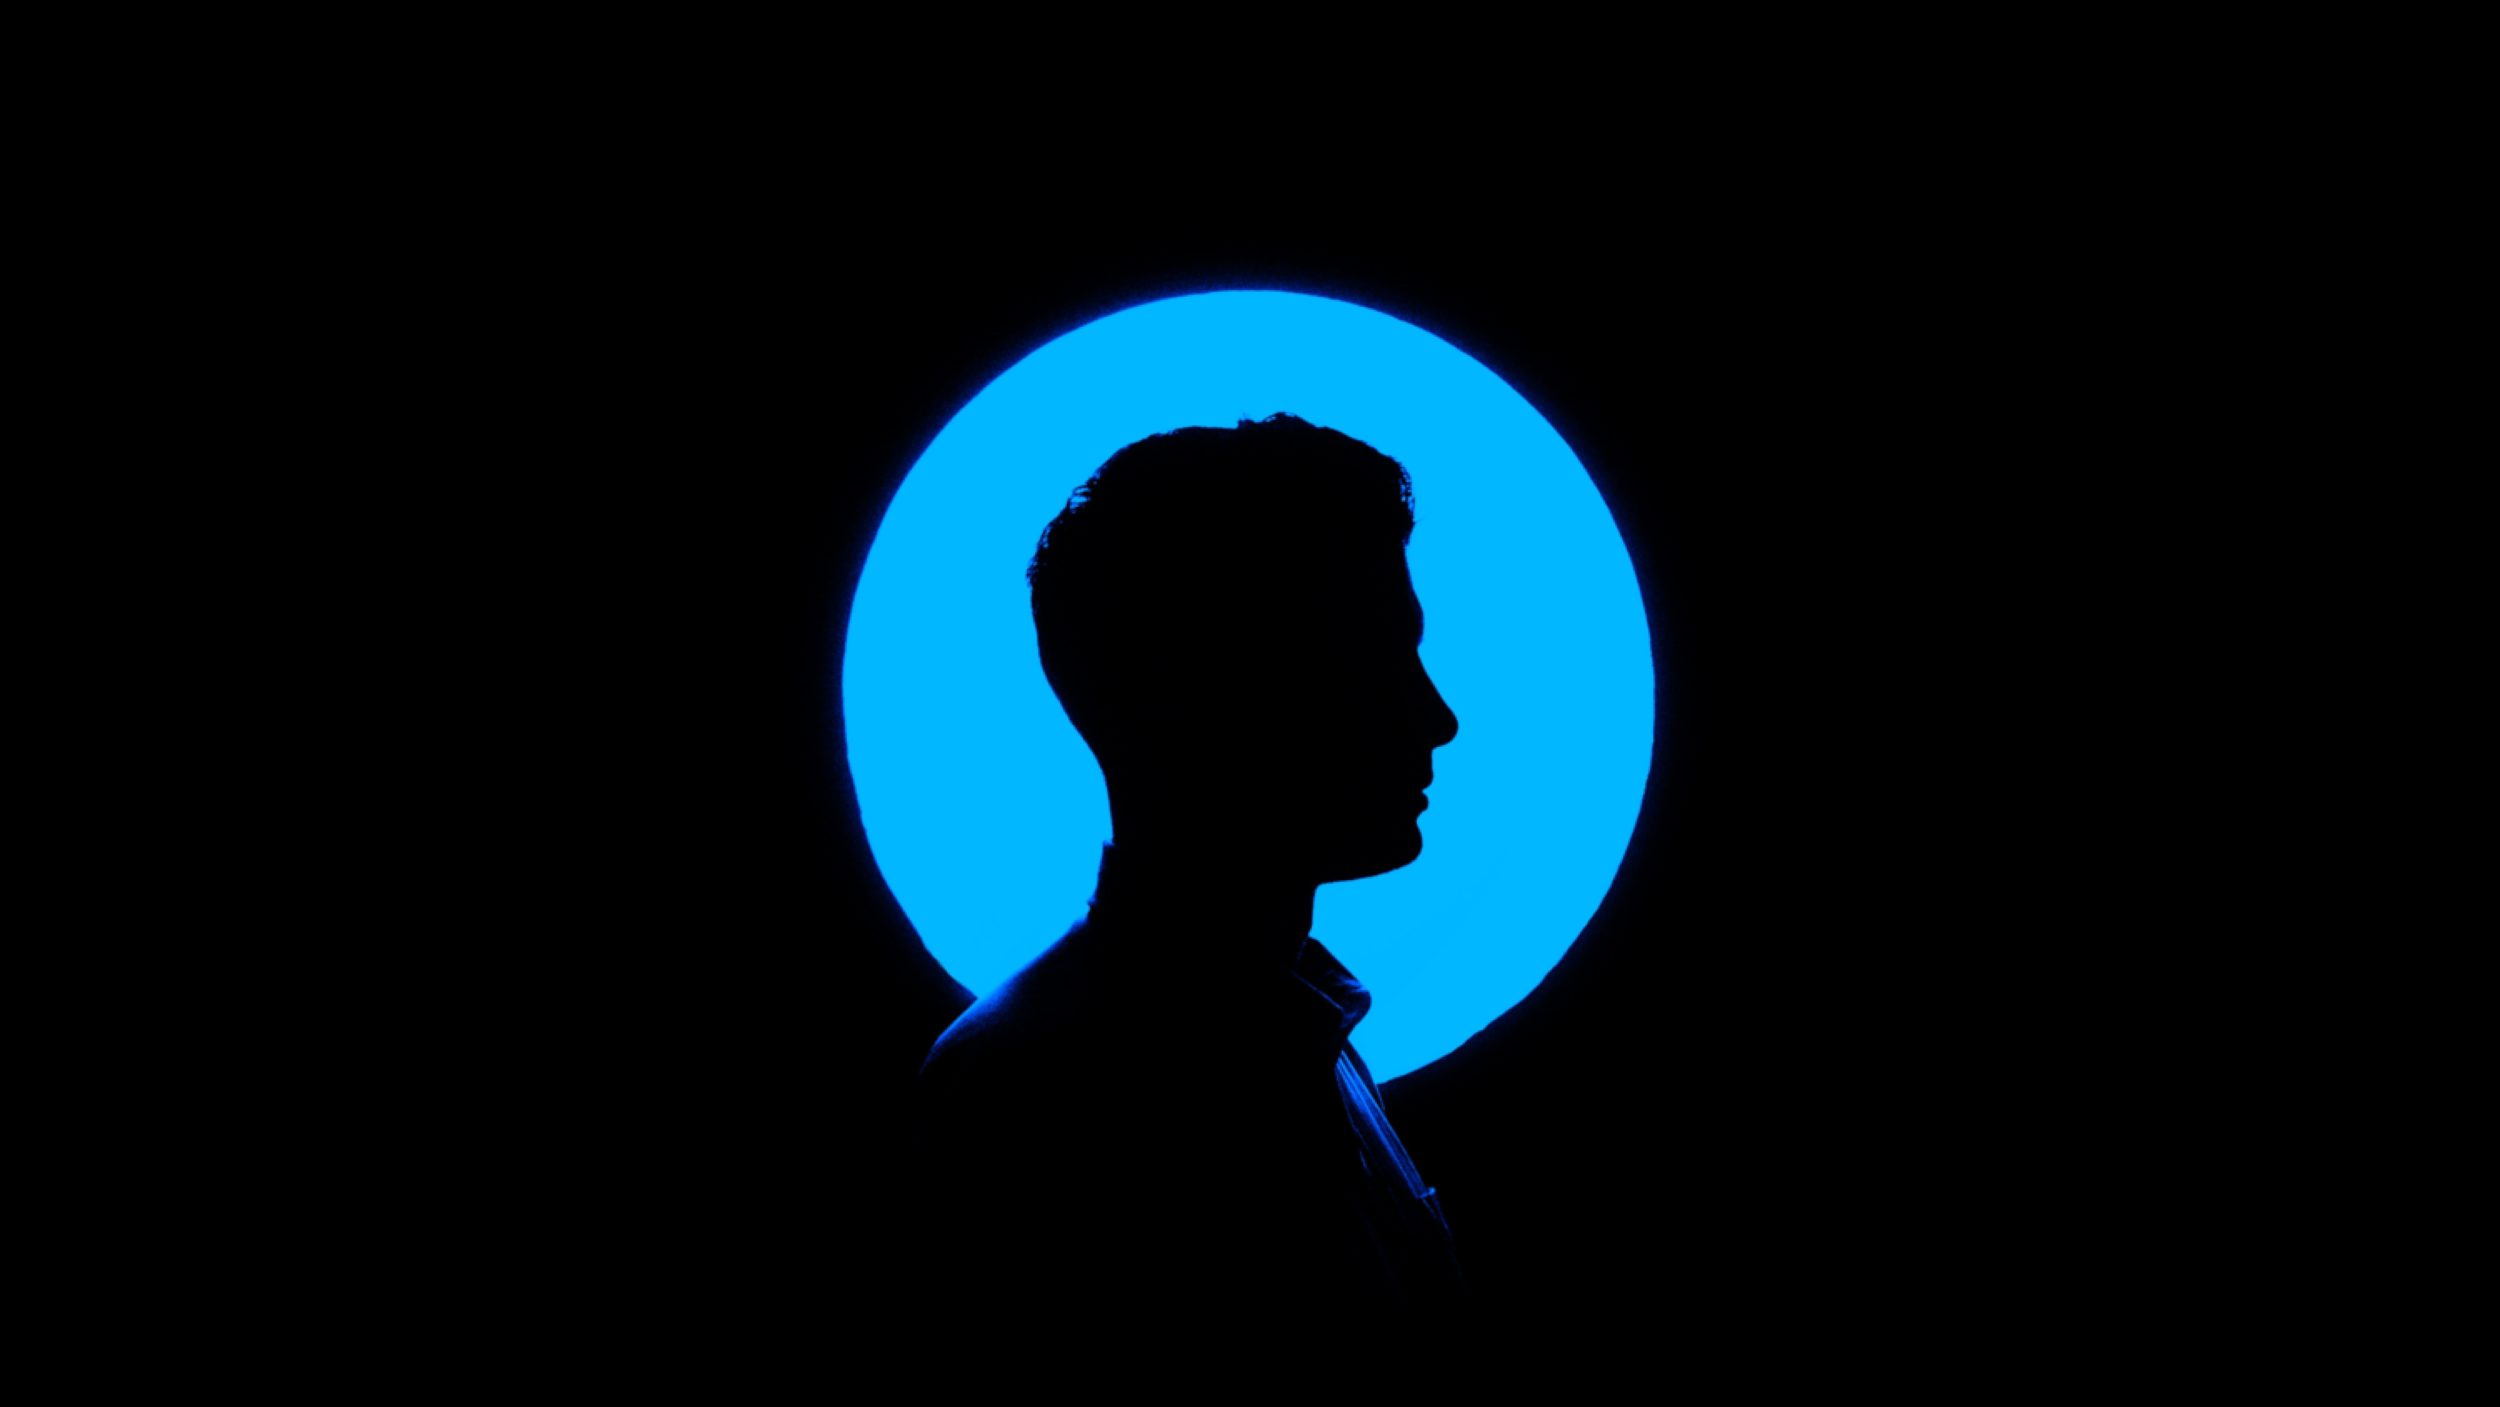 Silhouette of a man in front of a blue circular light.